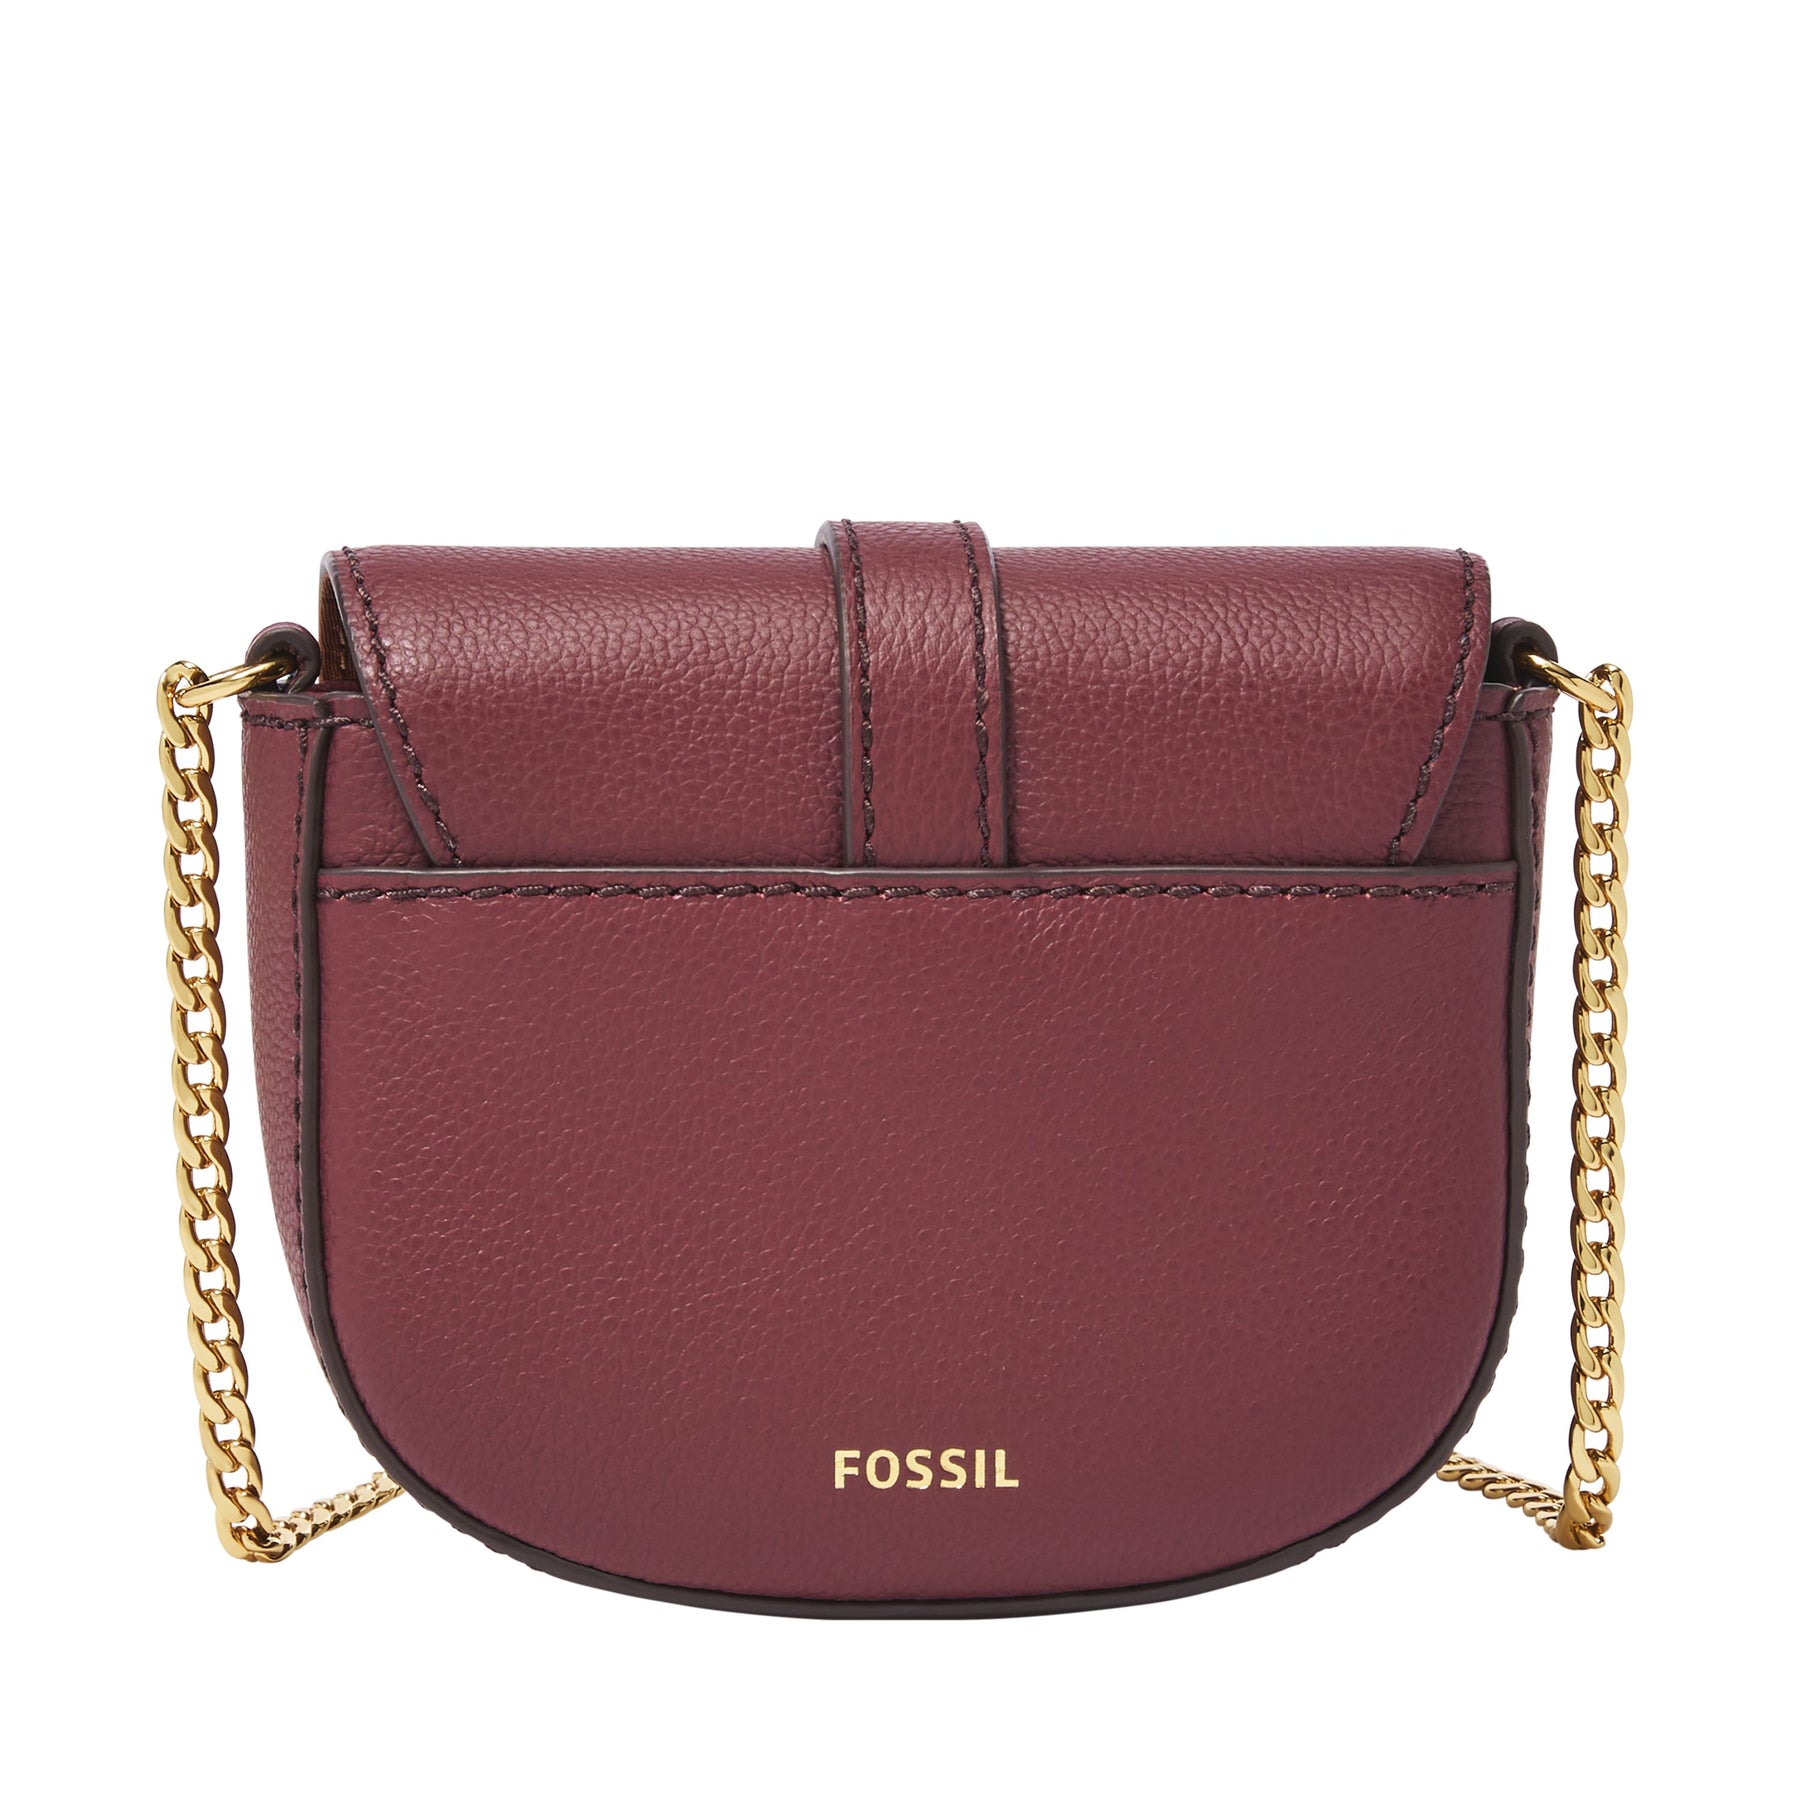 Fossil Fiona Satchel  Brown leather satchel, Fossil satchel, Red